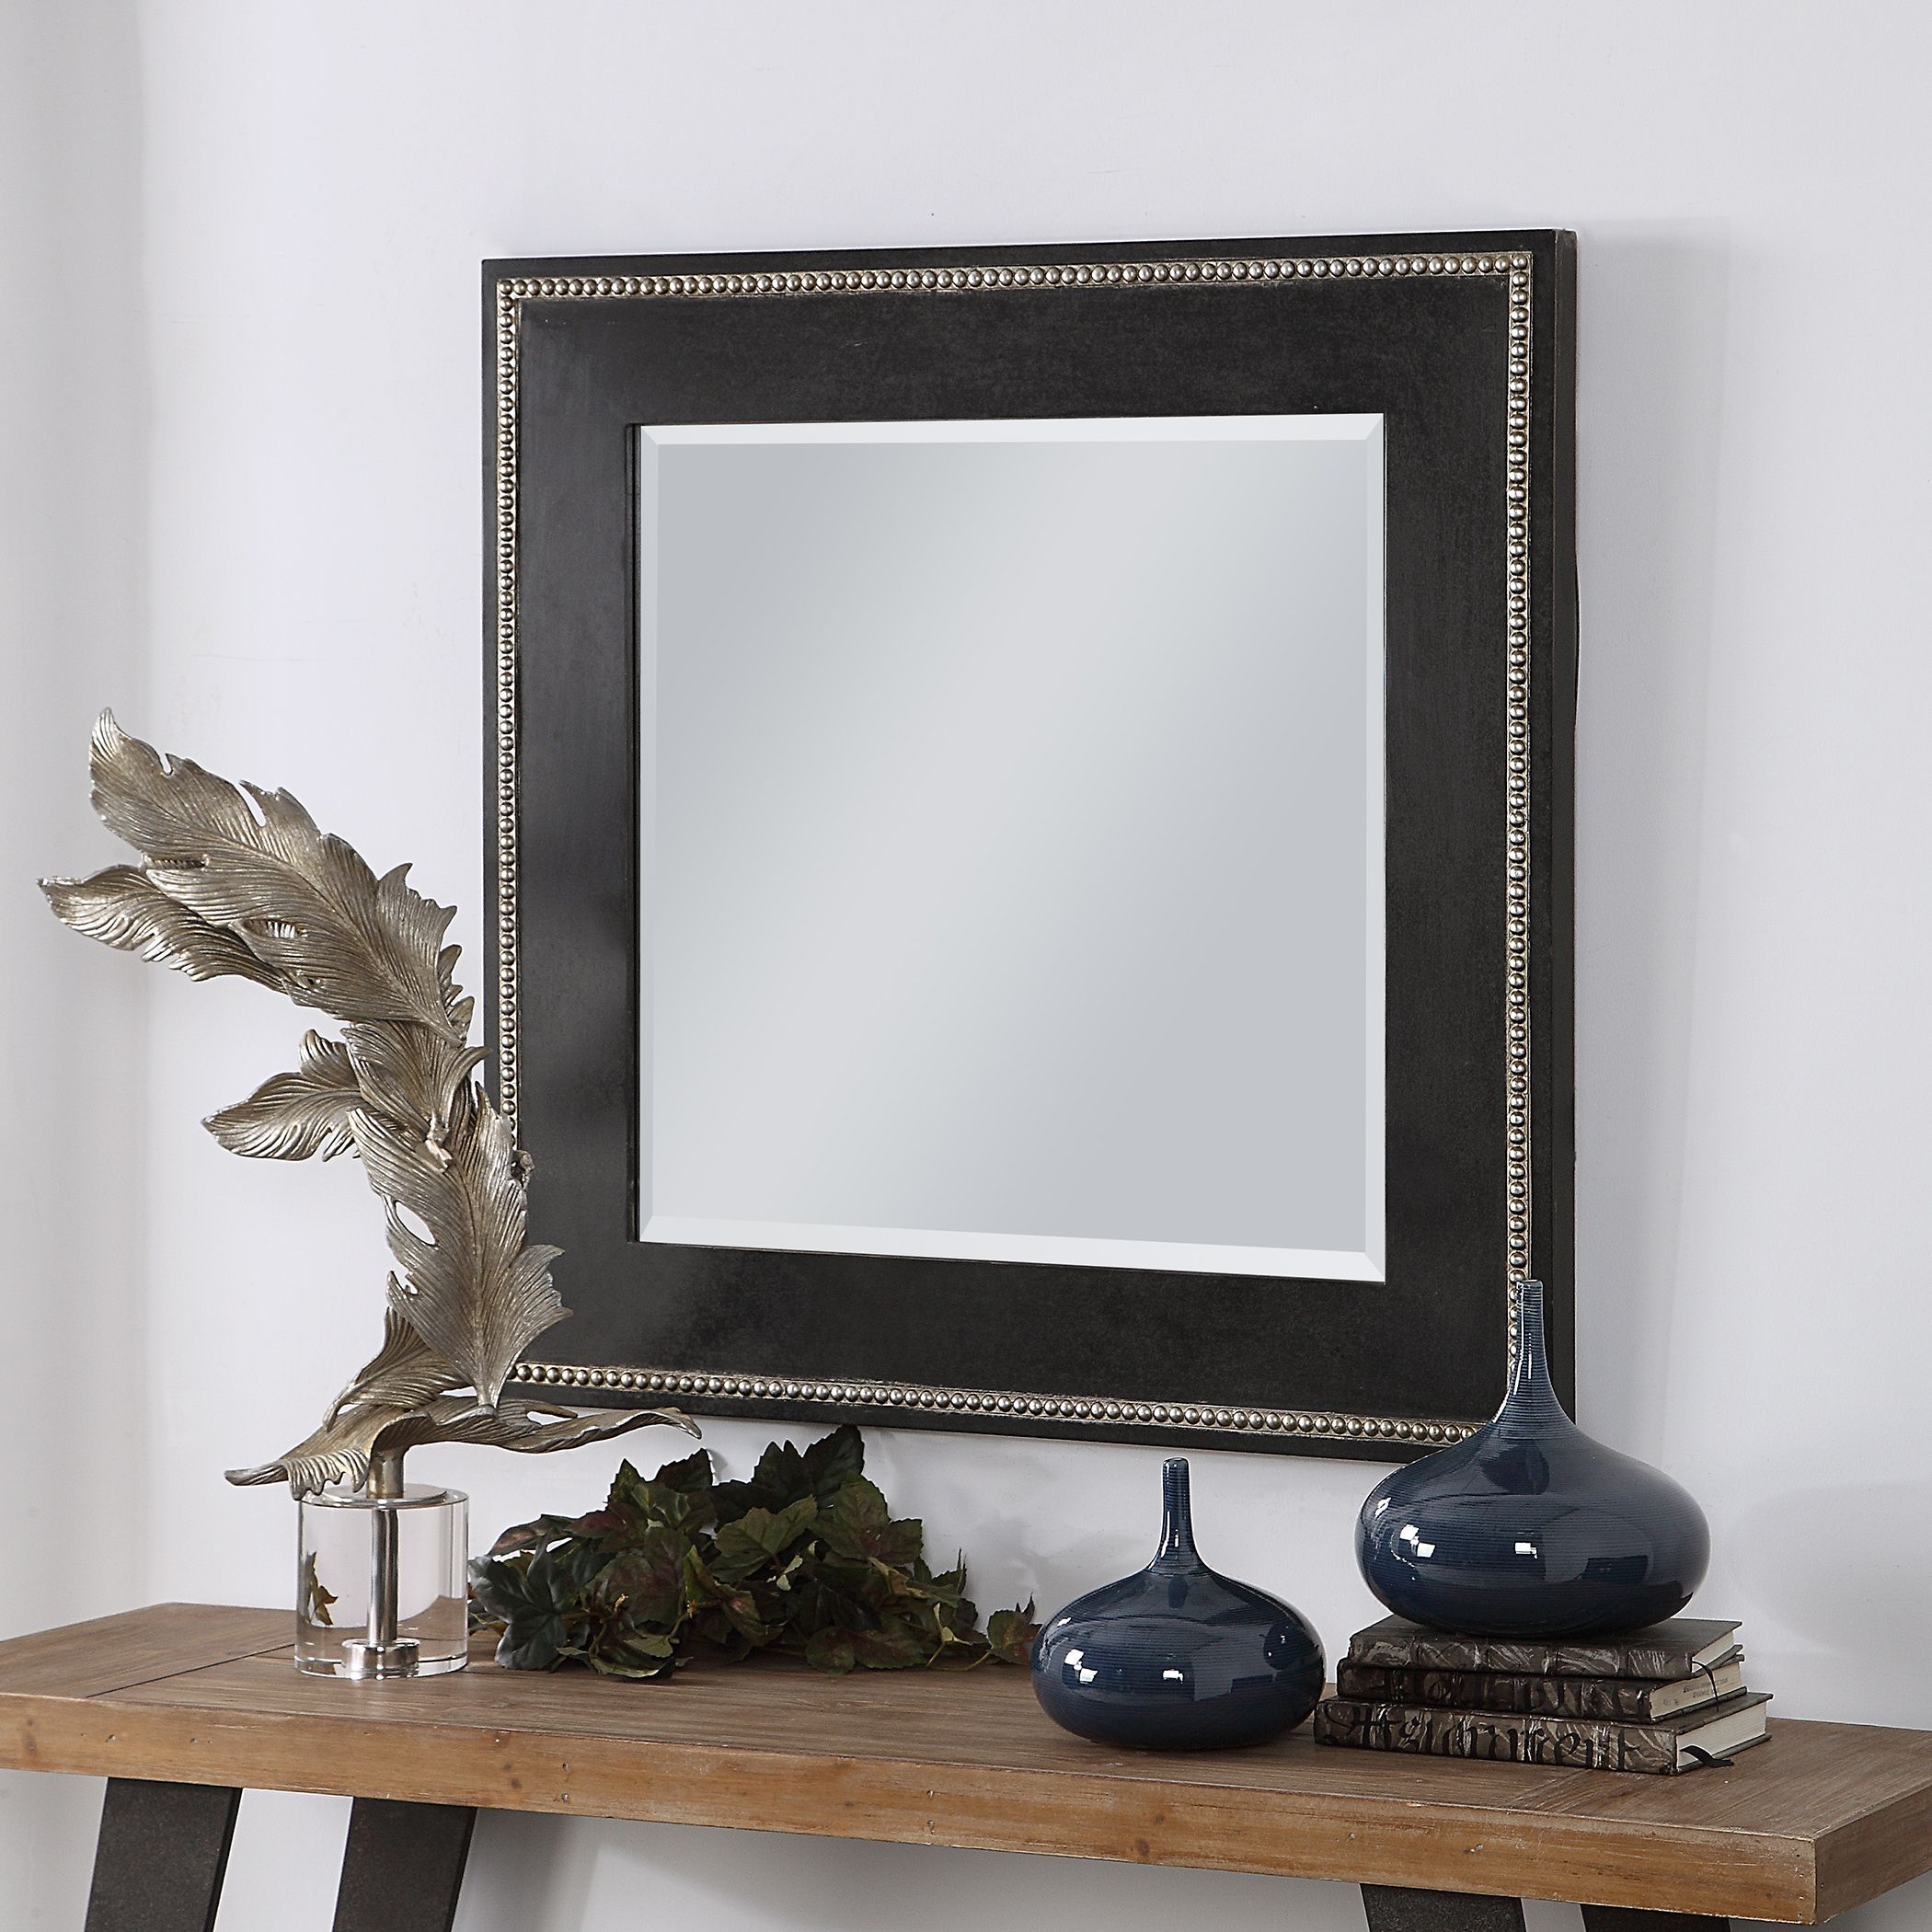 Large Black Square Beveled Wall Mirror Contemporary Style Traditional Intended For Black Wall Mirrors (View 6 of 15)